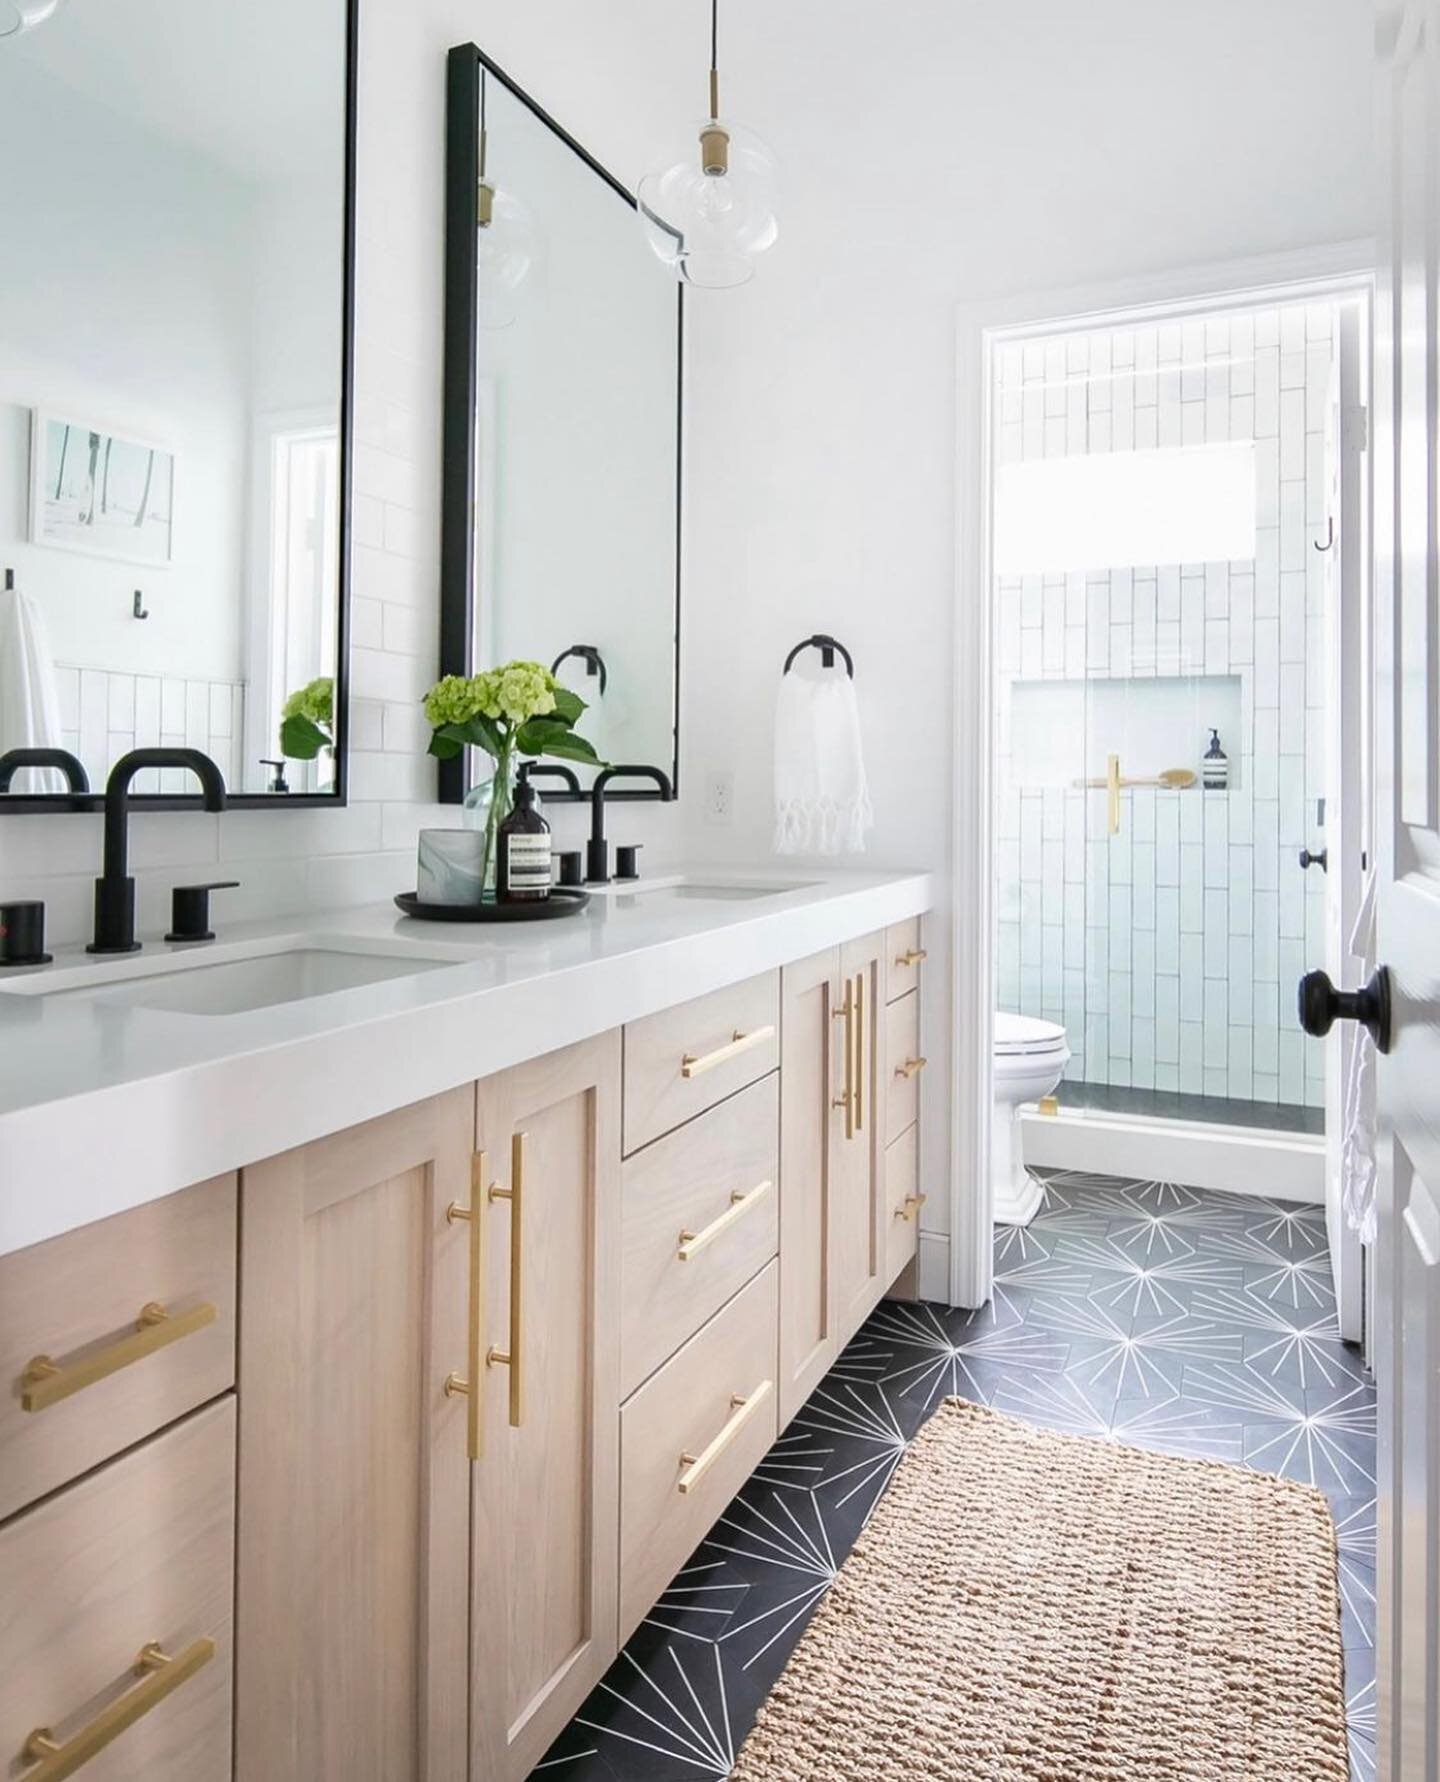 We have 3 projects to shoot and we can&rsquo;t wait to share them with you! For now we&rsquo;re throwing it back to this fun guest/teen bathroom remodel that accomplished everything we needed - light + bright, tons of storage, classic but modern and 